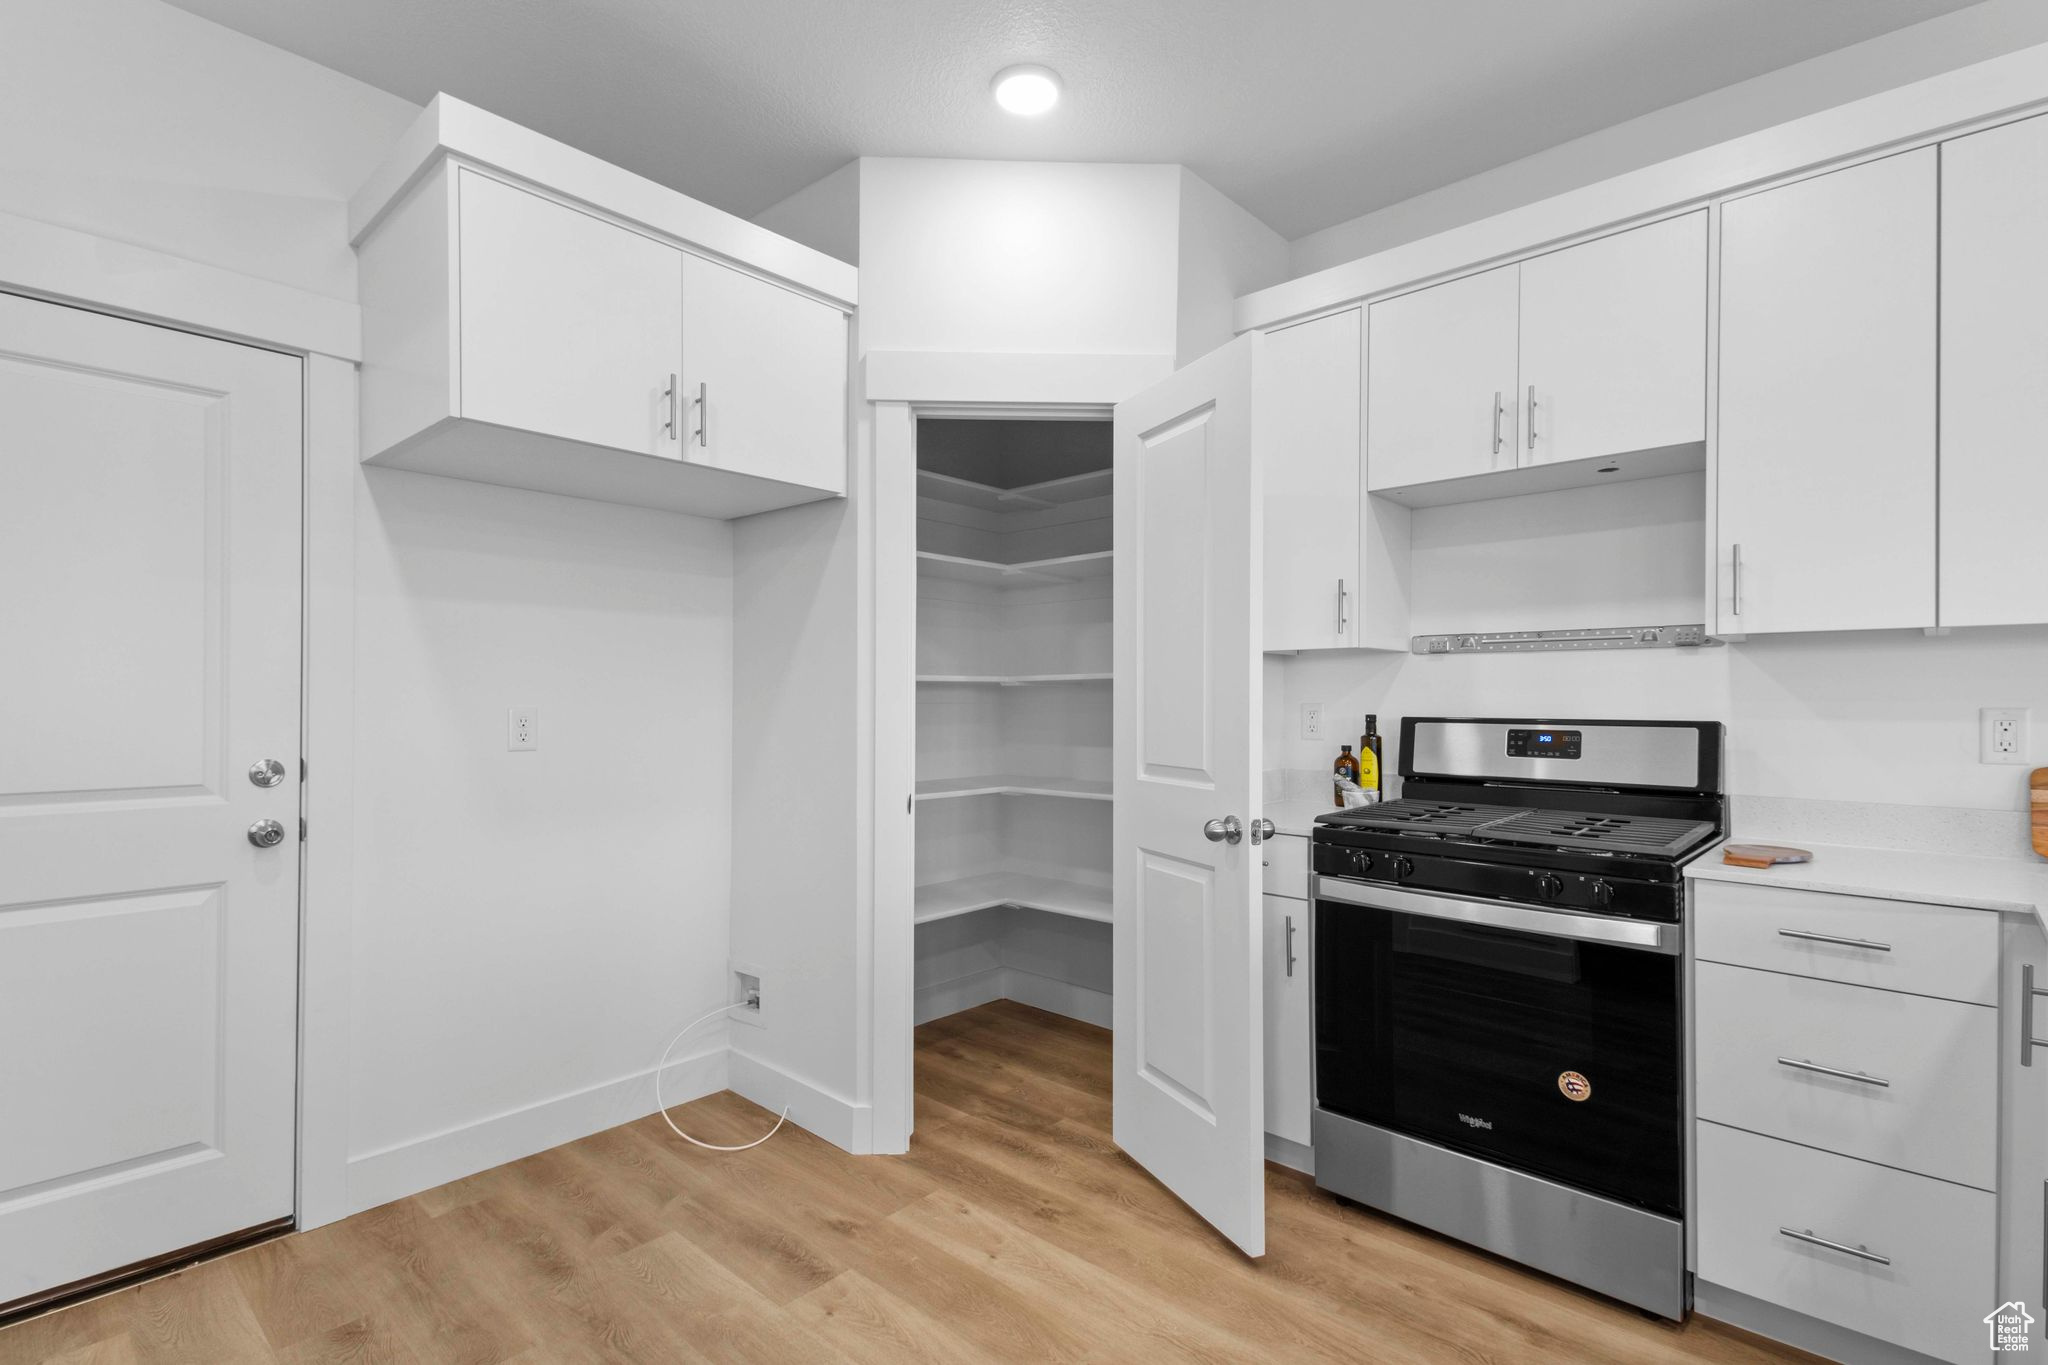 Kitchen featuring white cabinets, light wood-type flooring, and stainless steel gas range oven